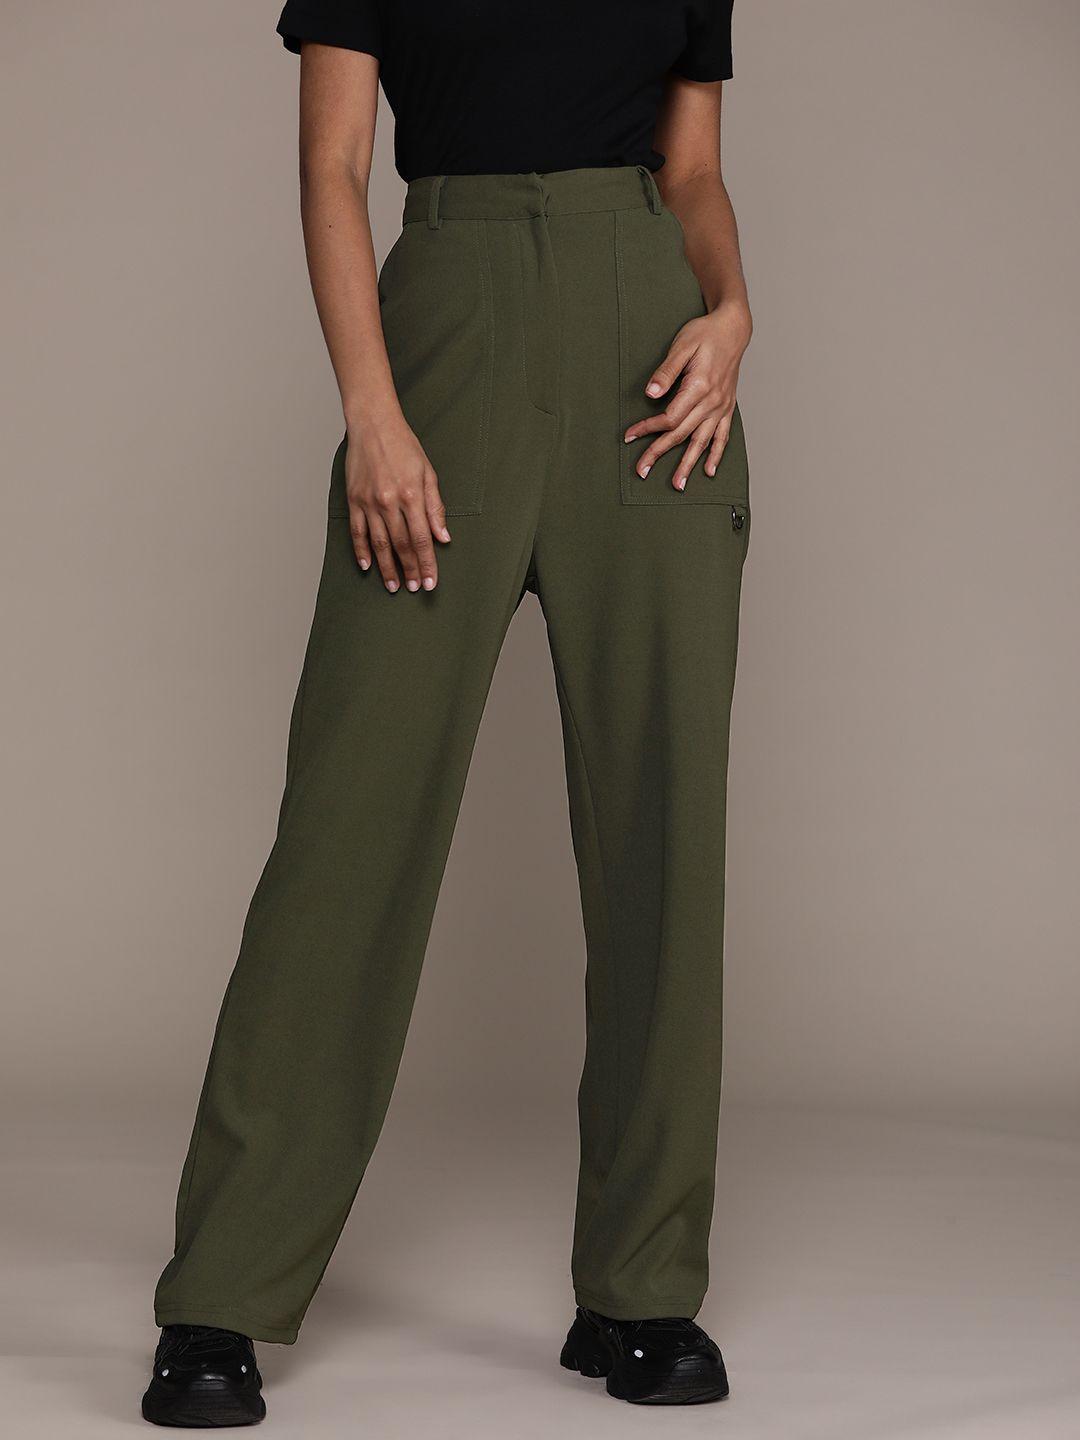 the roadster lifestyle co. women high-rise trousers